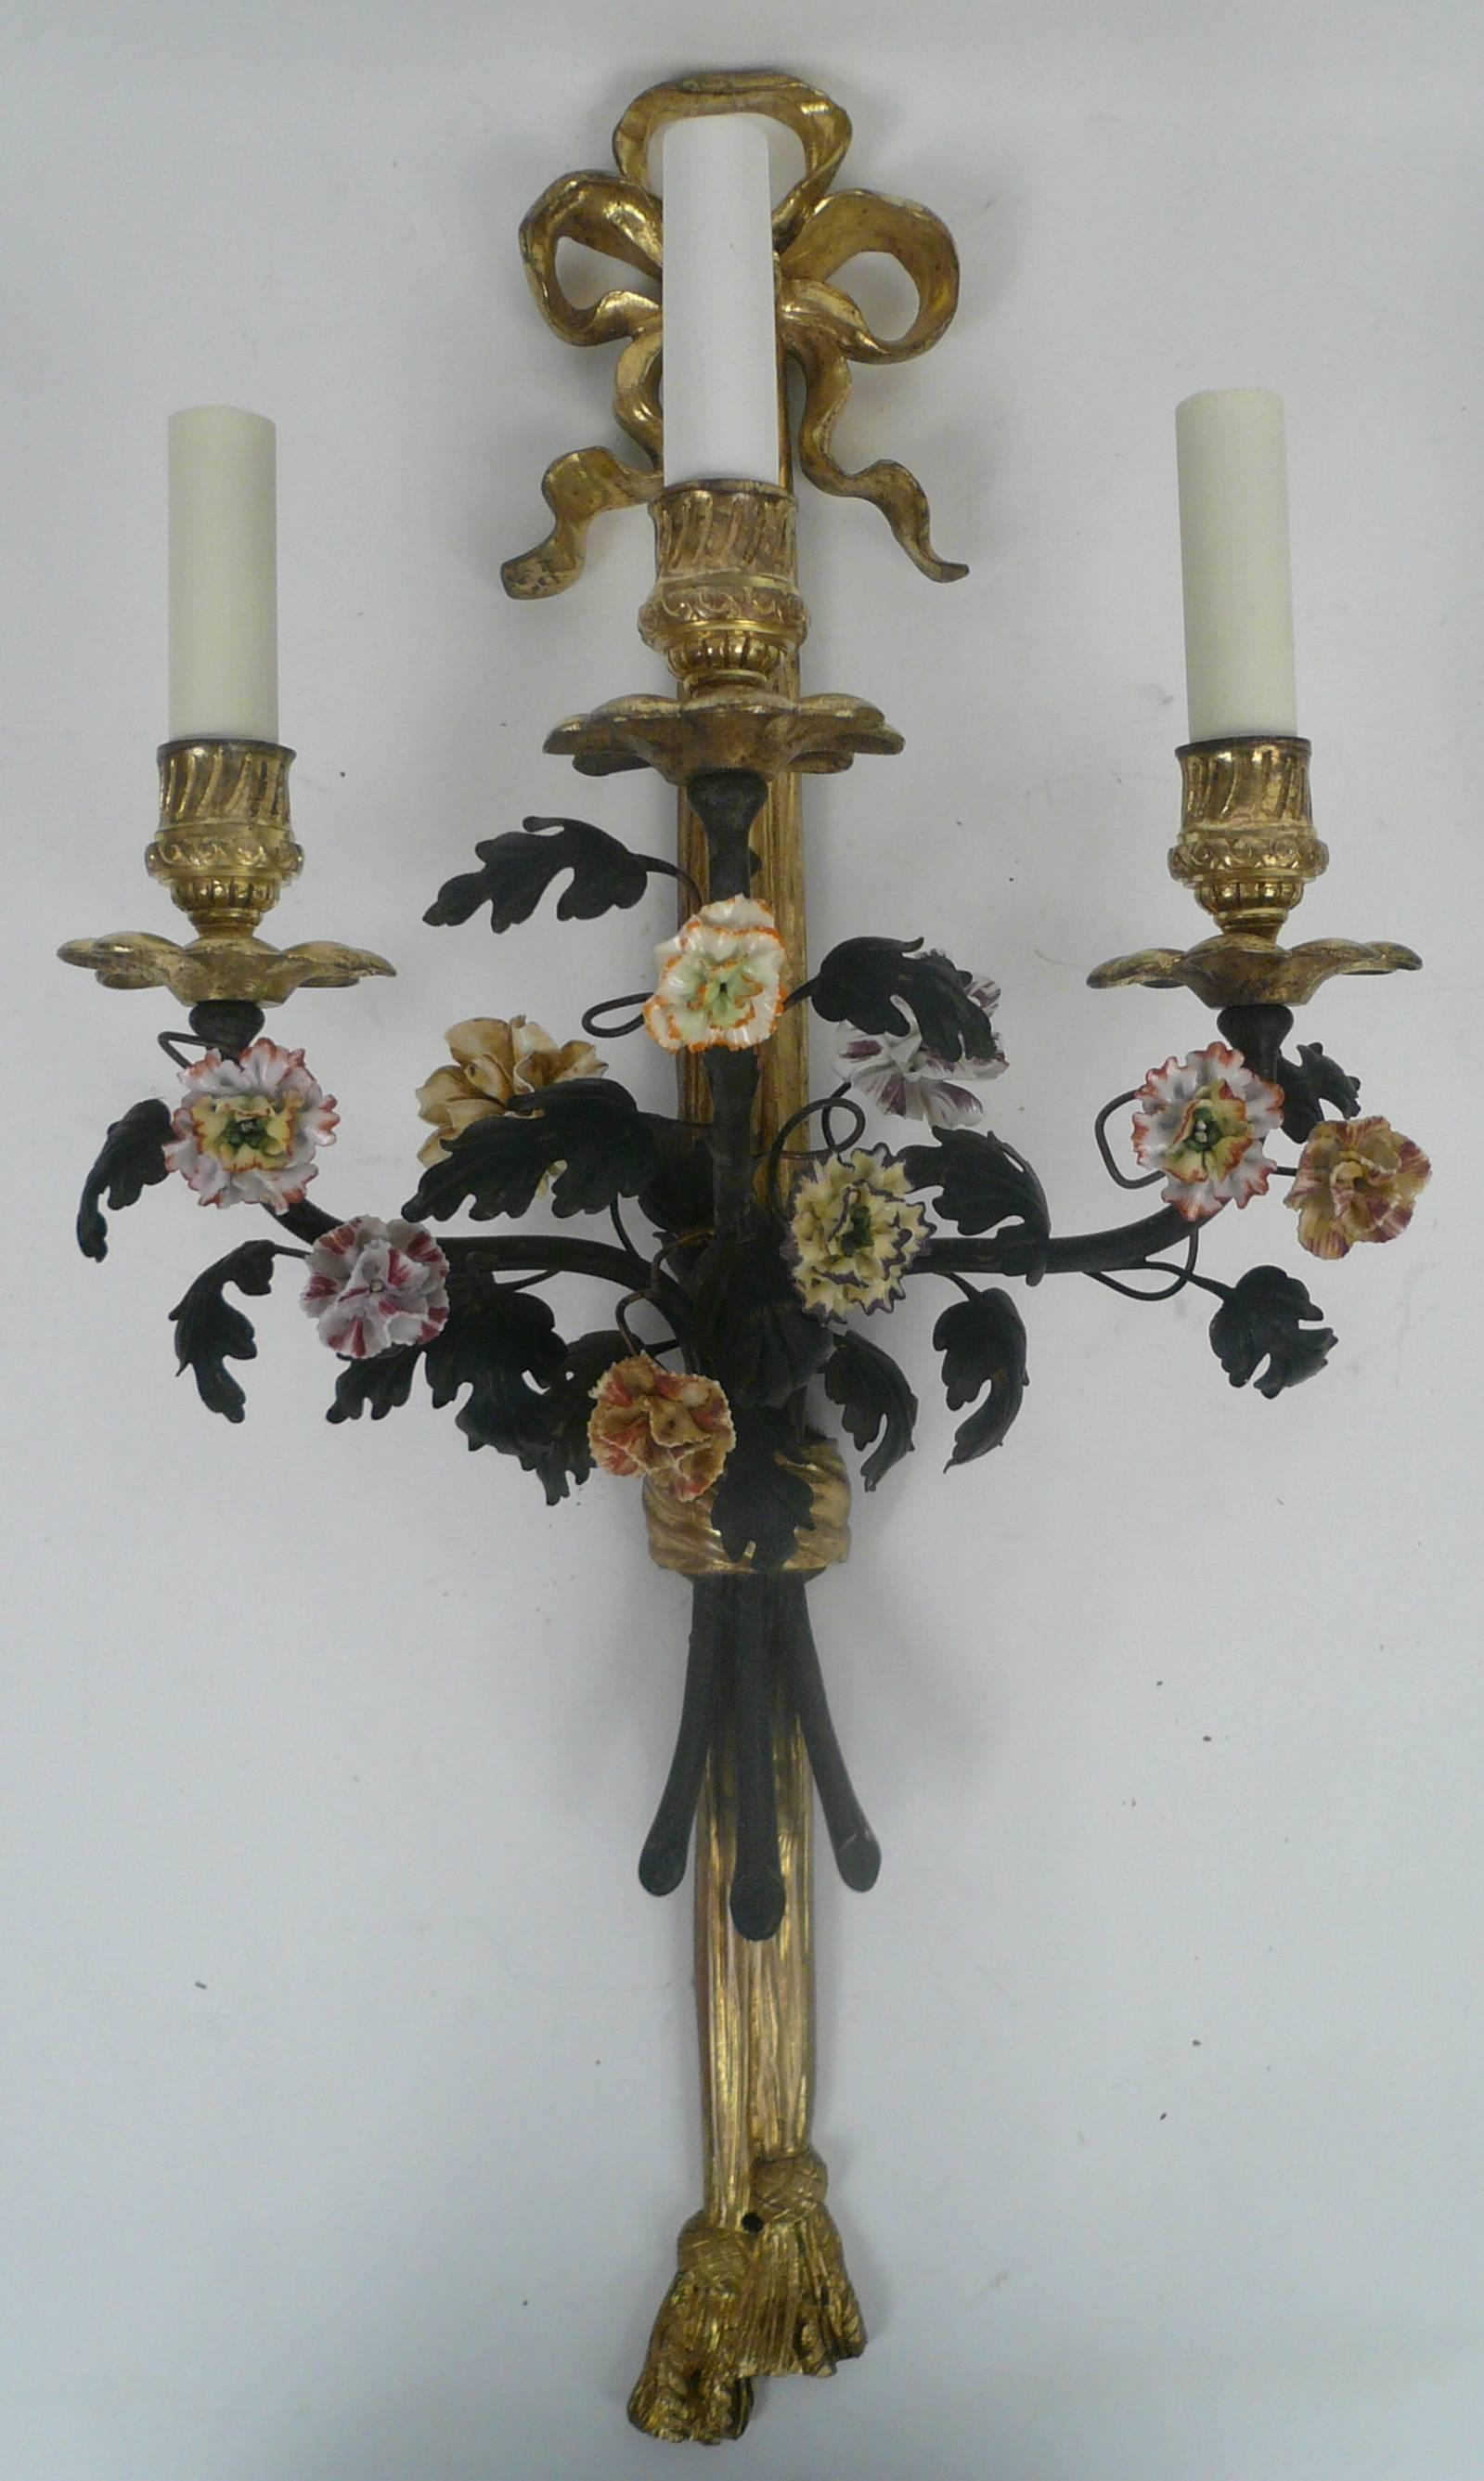 This beautiful pair of bowknot, ribbon and tassel form sconces feature enameled leaves and hand-painted porcelain flowers. They have been rewired and are ready for use.